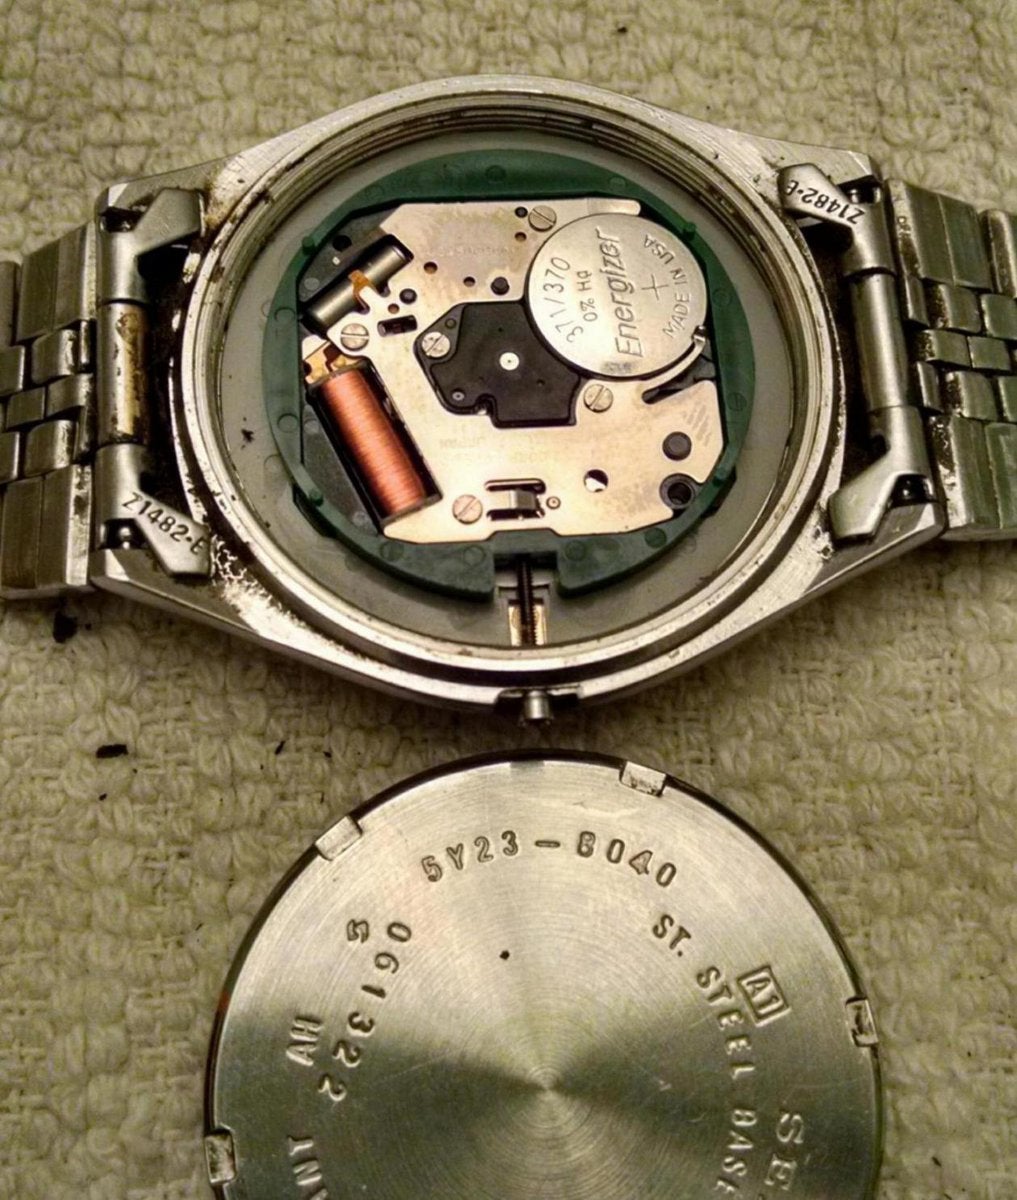 Removing stem on Seiko 5y23-8040 | The Watch Site